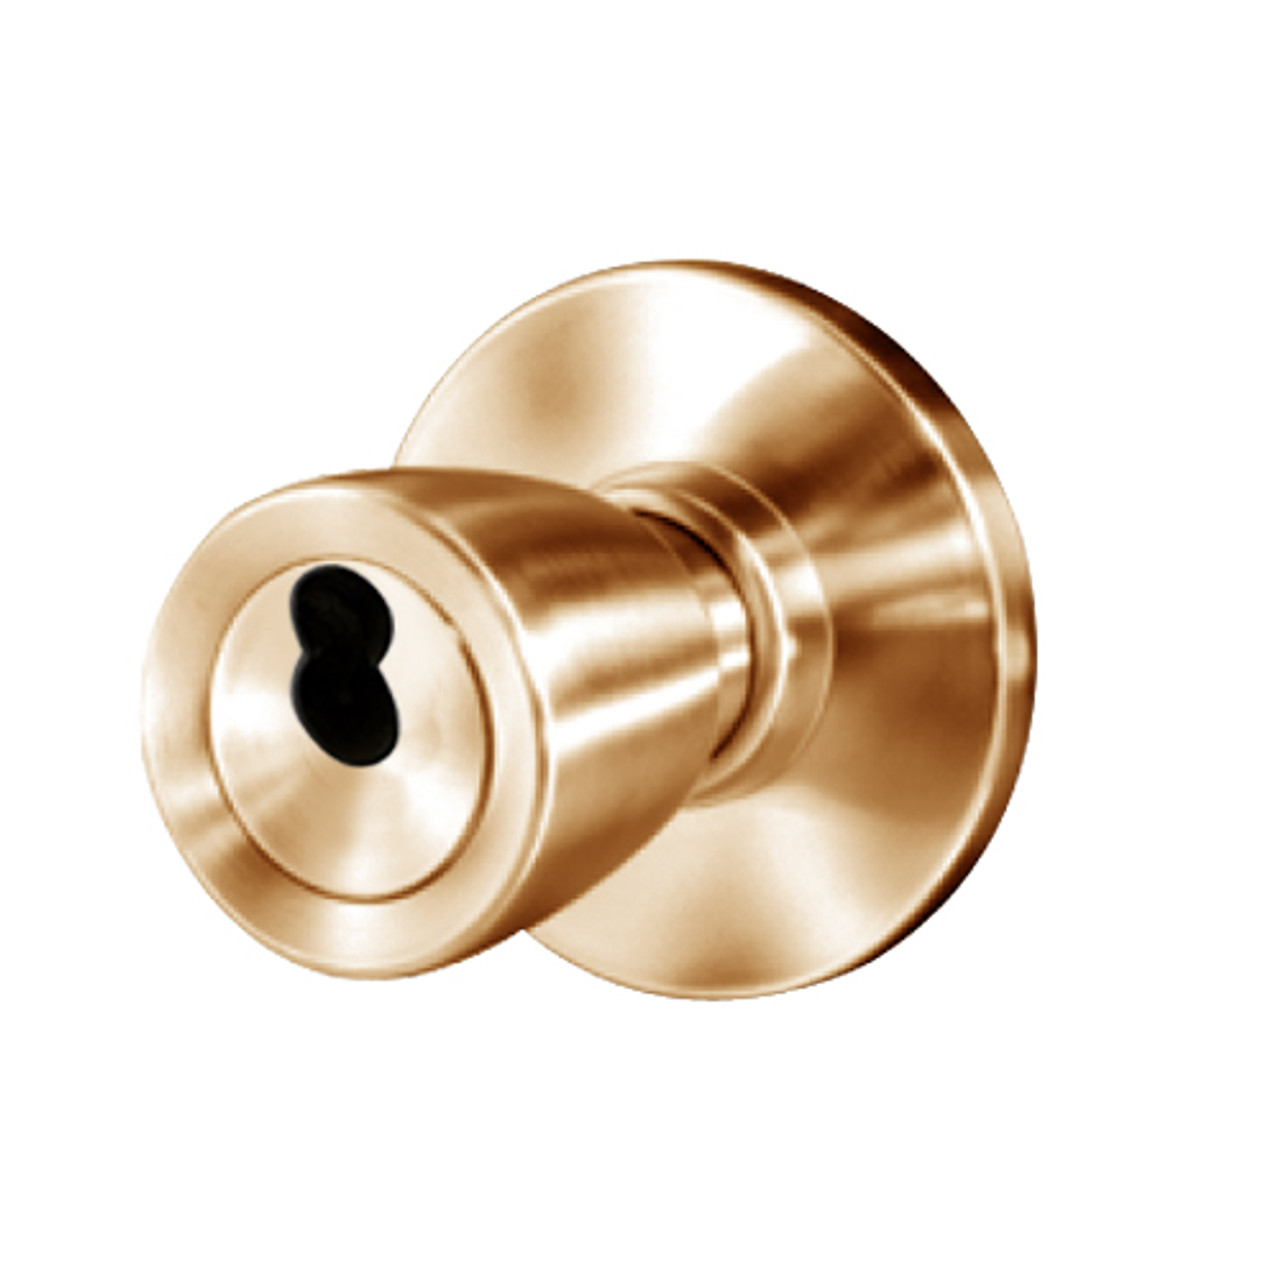 8K57YD6AS3611 Best 8K Series Exit Heavy Duty Cylindrical Knob Locks with Tulip Style in Bright Bronze